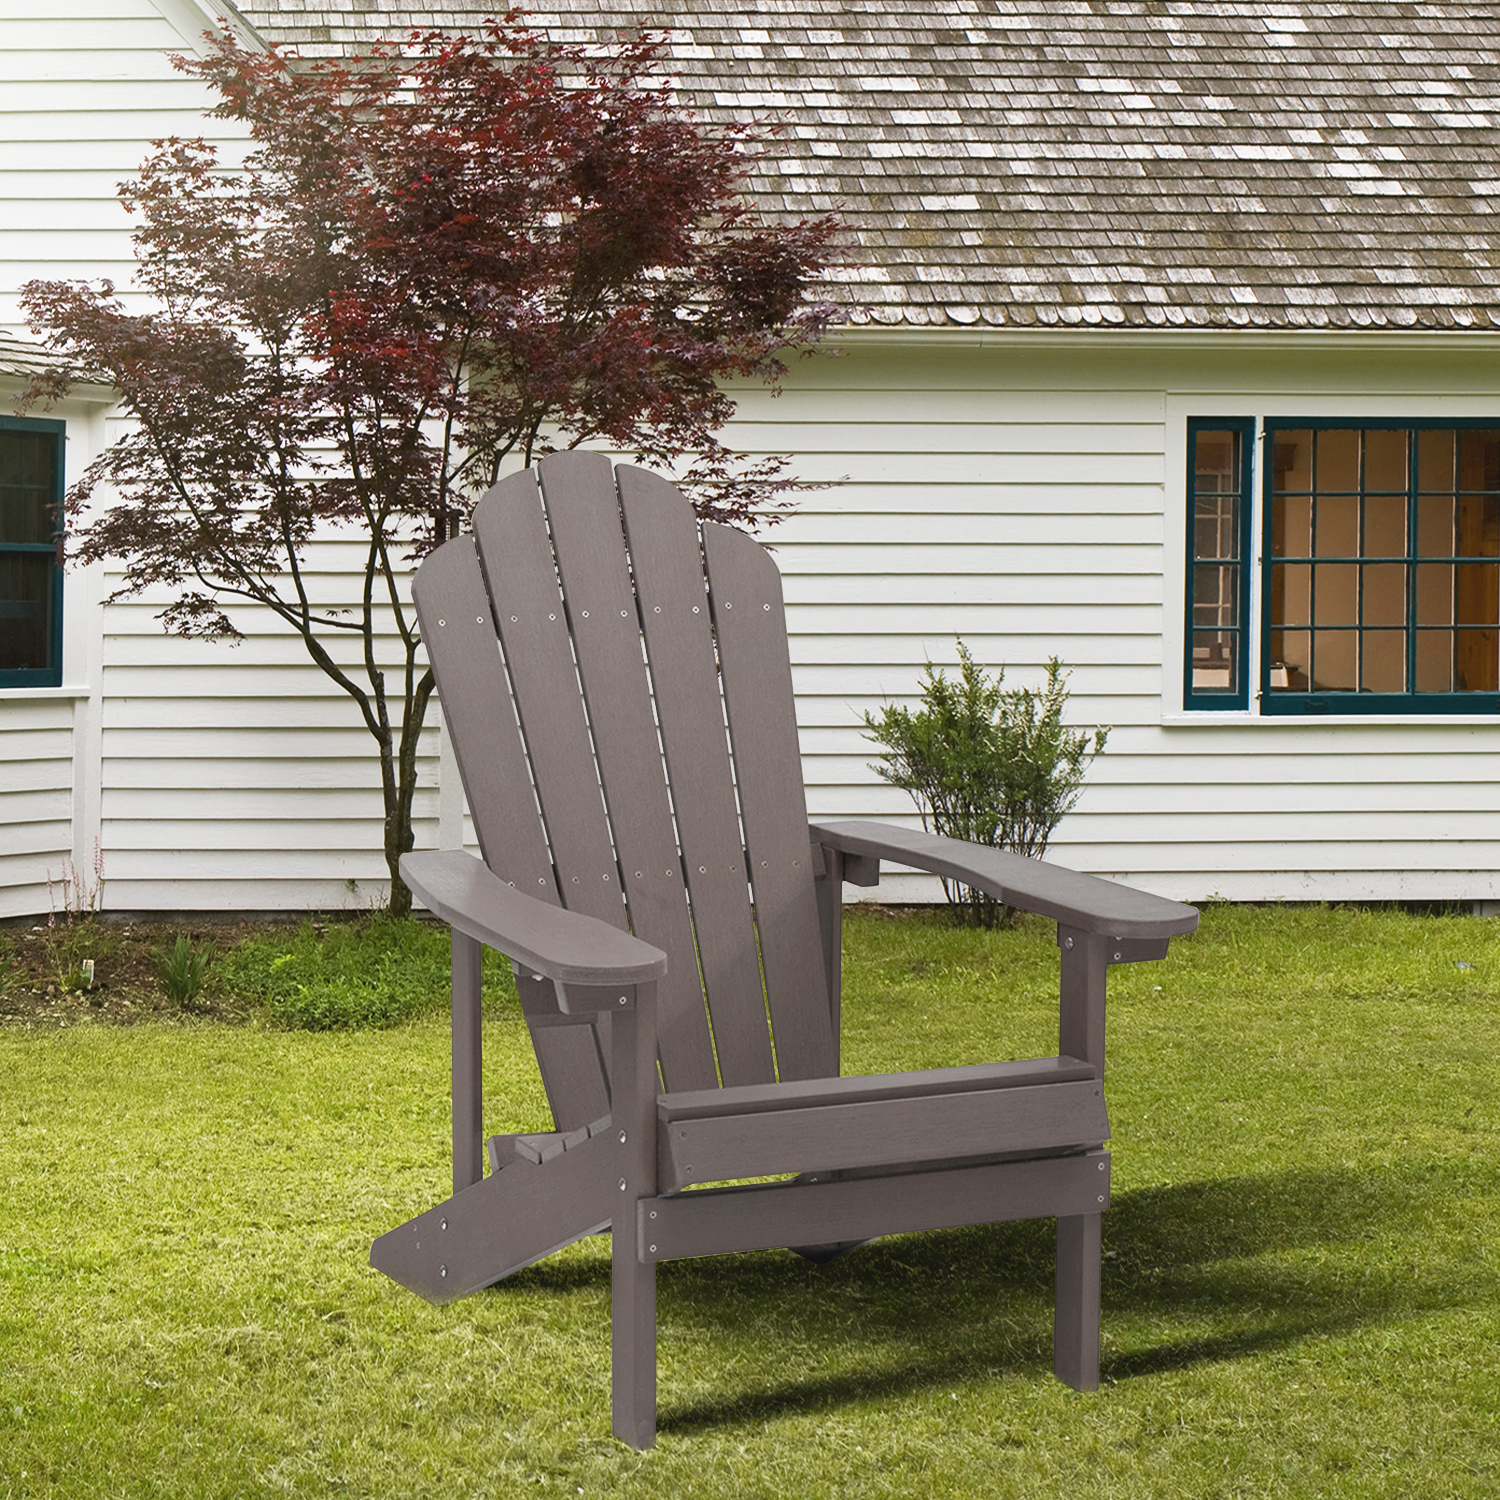 Sunny Shower Weather Resistant Accent Furniture Fold Outdoor Adirondack Chair for Garden Porch Patio - image 2 of 8